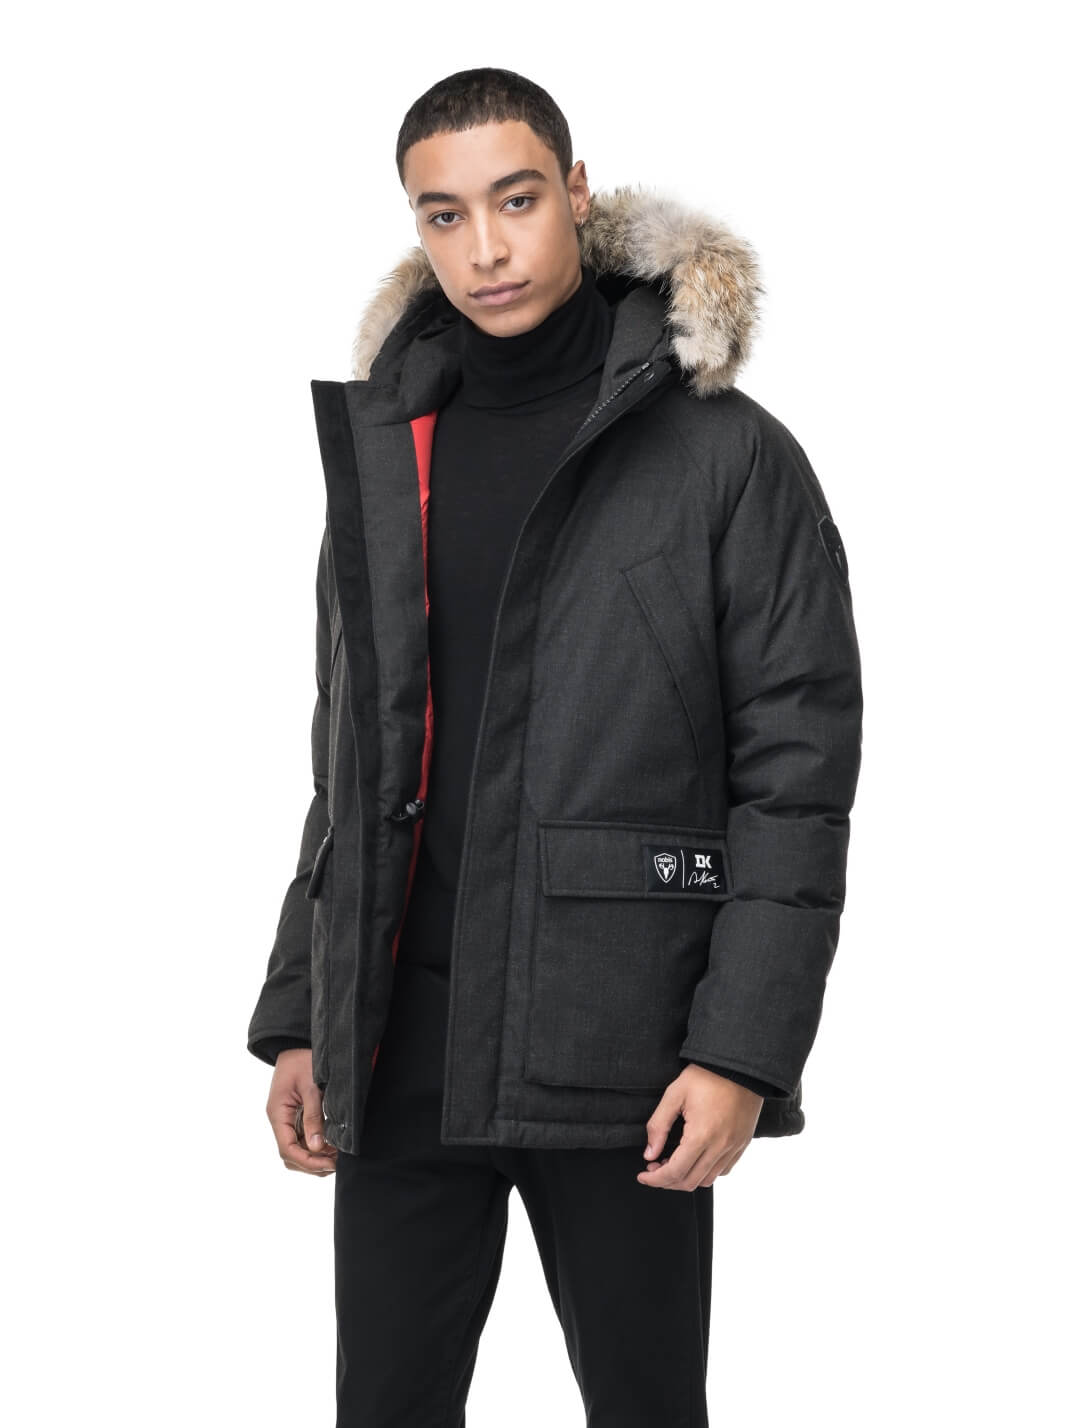 Duncan Keith Heritage Men's Parka in hip length, and features Canadian duck down insulation, non-removable hood with removable coyote fur trim, fleece-lined chest pockets, top and side entry waist pockets, adjustable waist cord, interior zipper pocket, and co-branding with Keith's signature on the left outer waist pocket, in H. Black